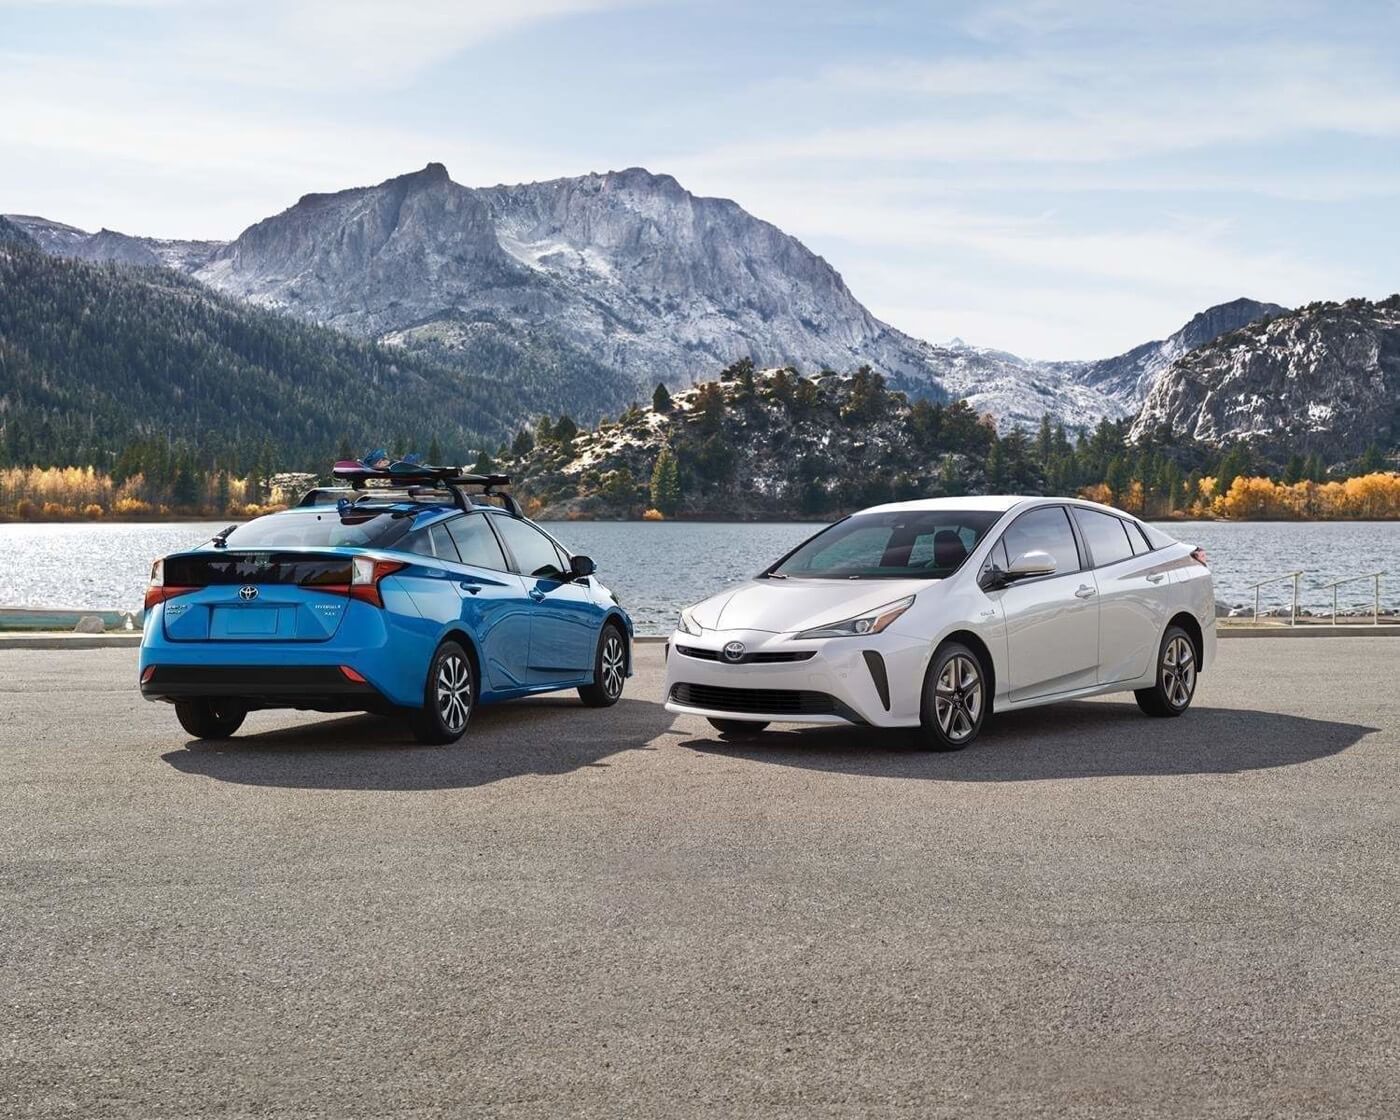 Front and back view of La Toyota Prius and Prius Prime 2022